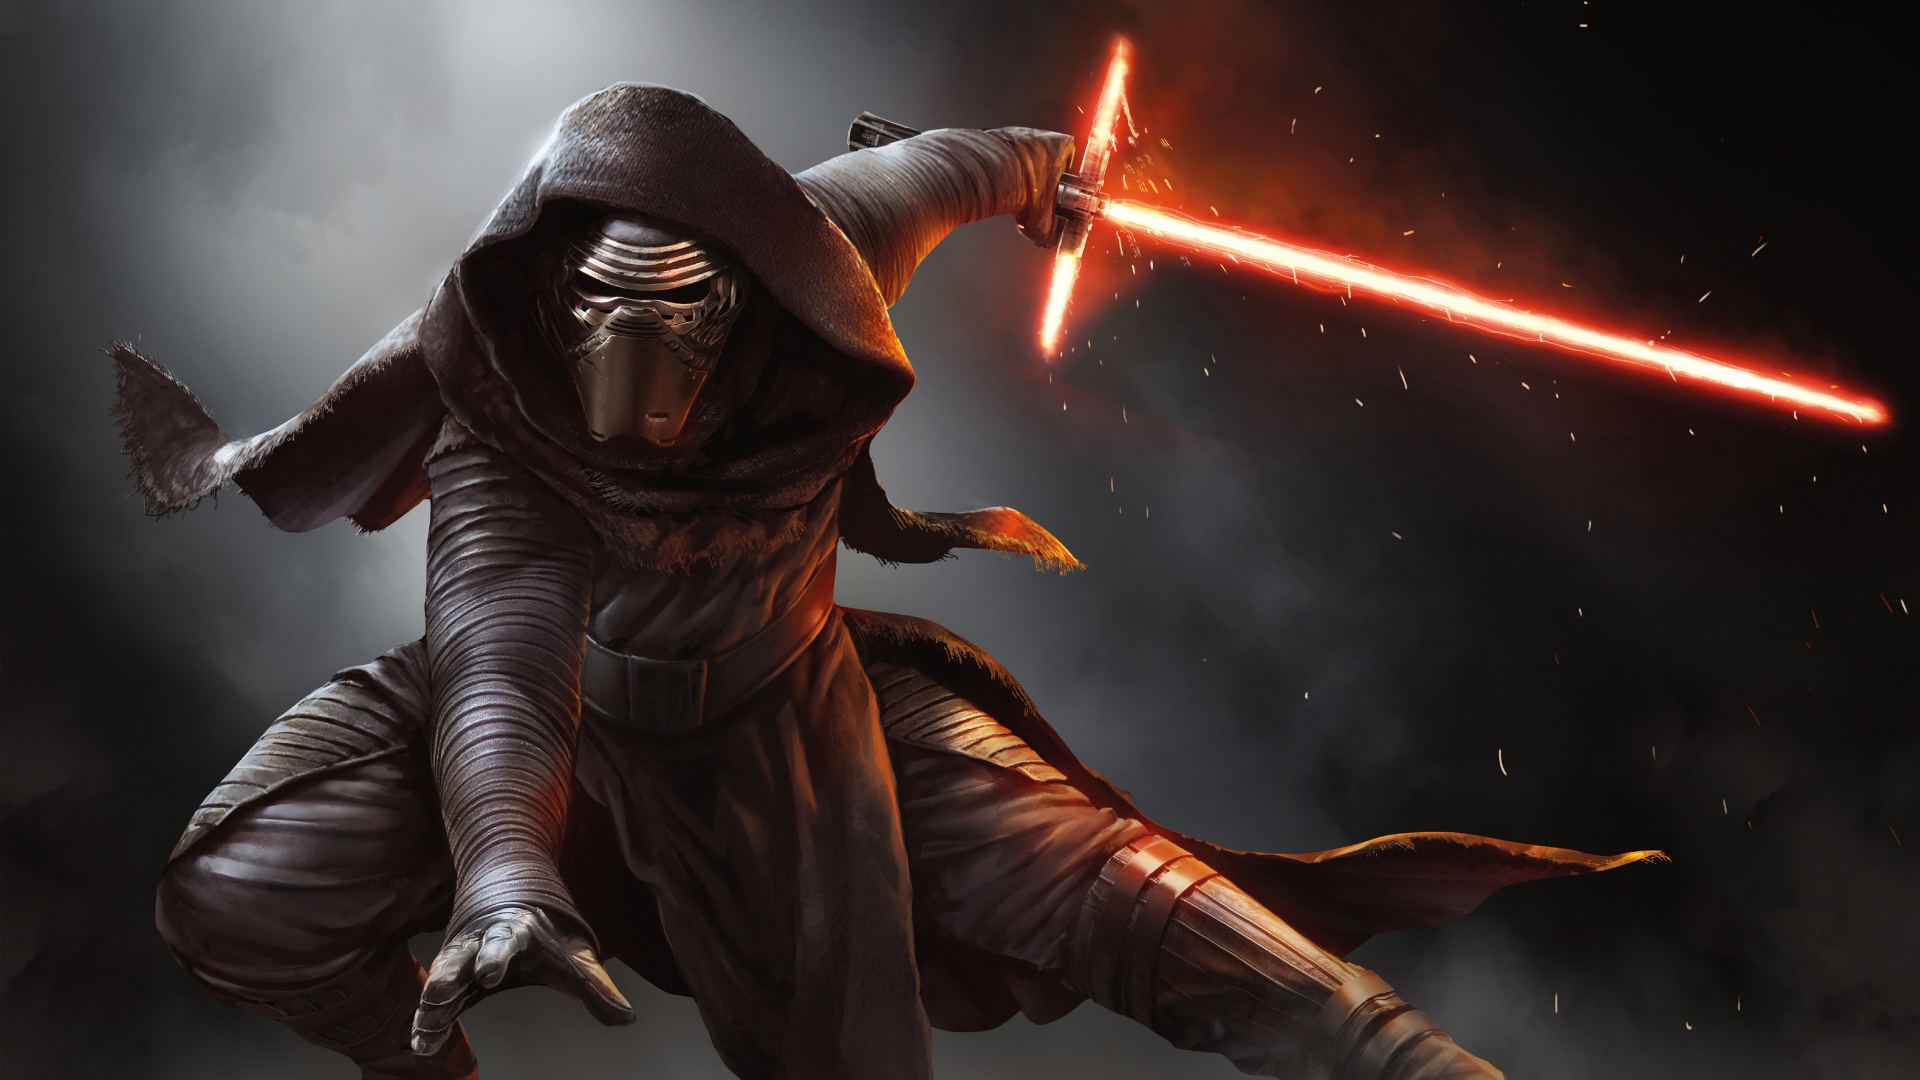 KYLO REN WALLPAPERS FREE Wallpapers Background images 1920x1080